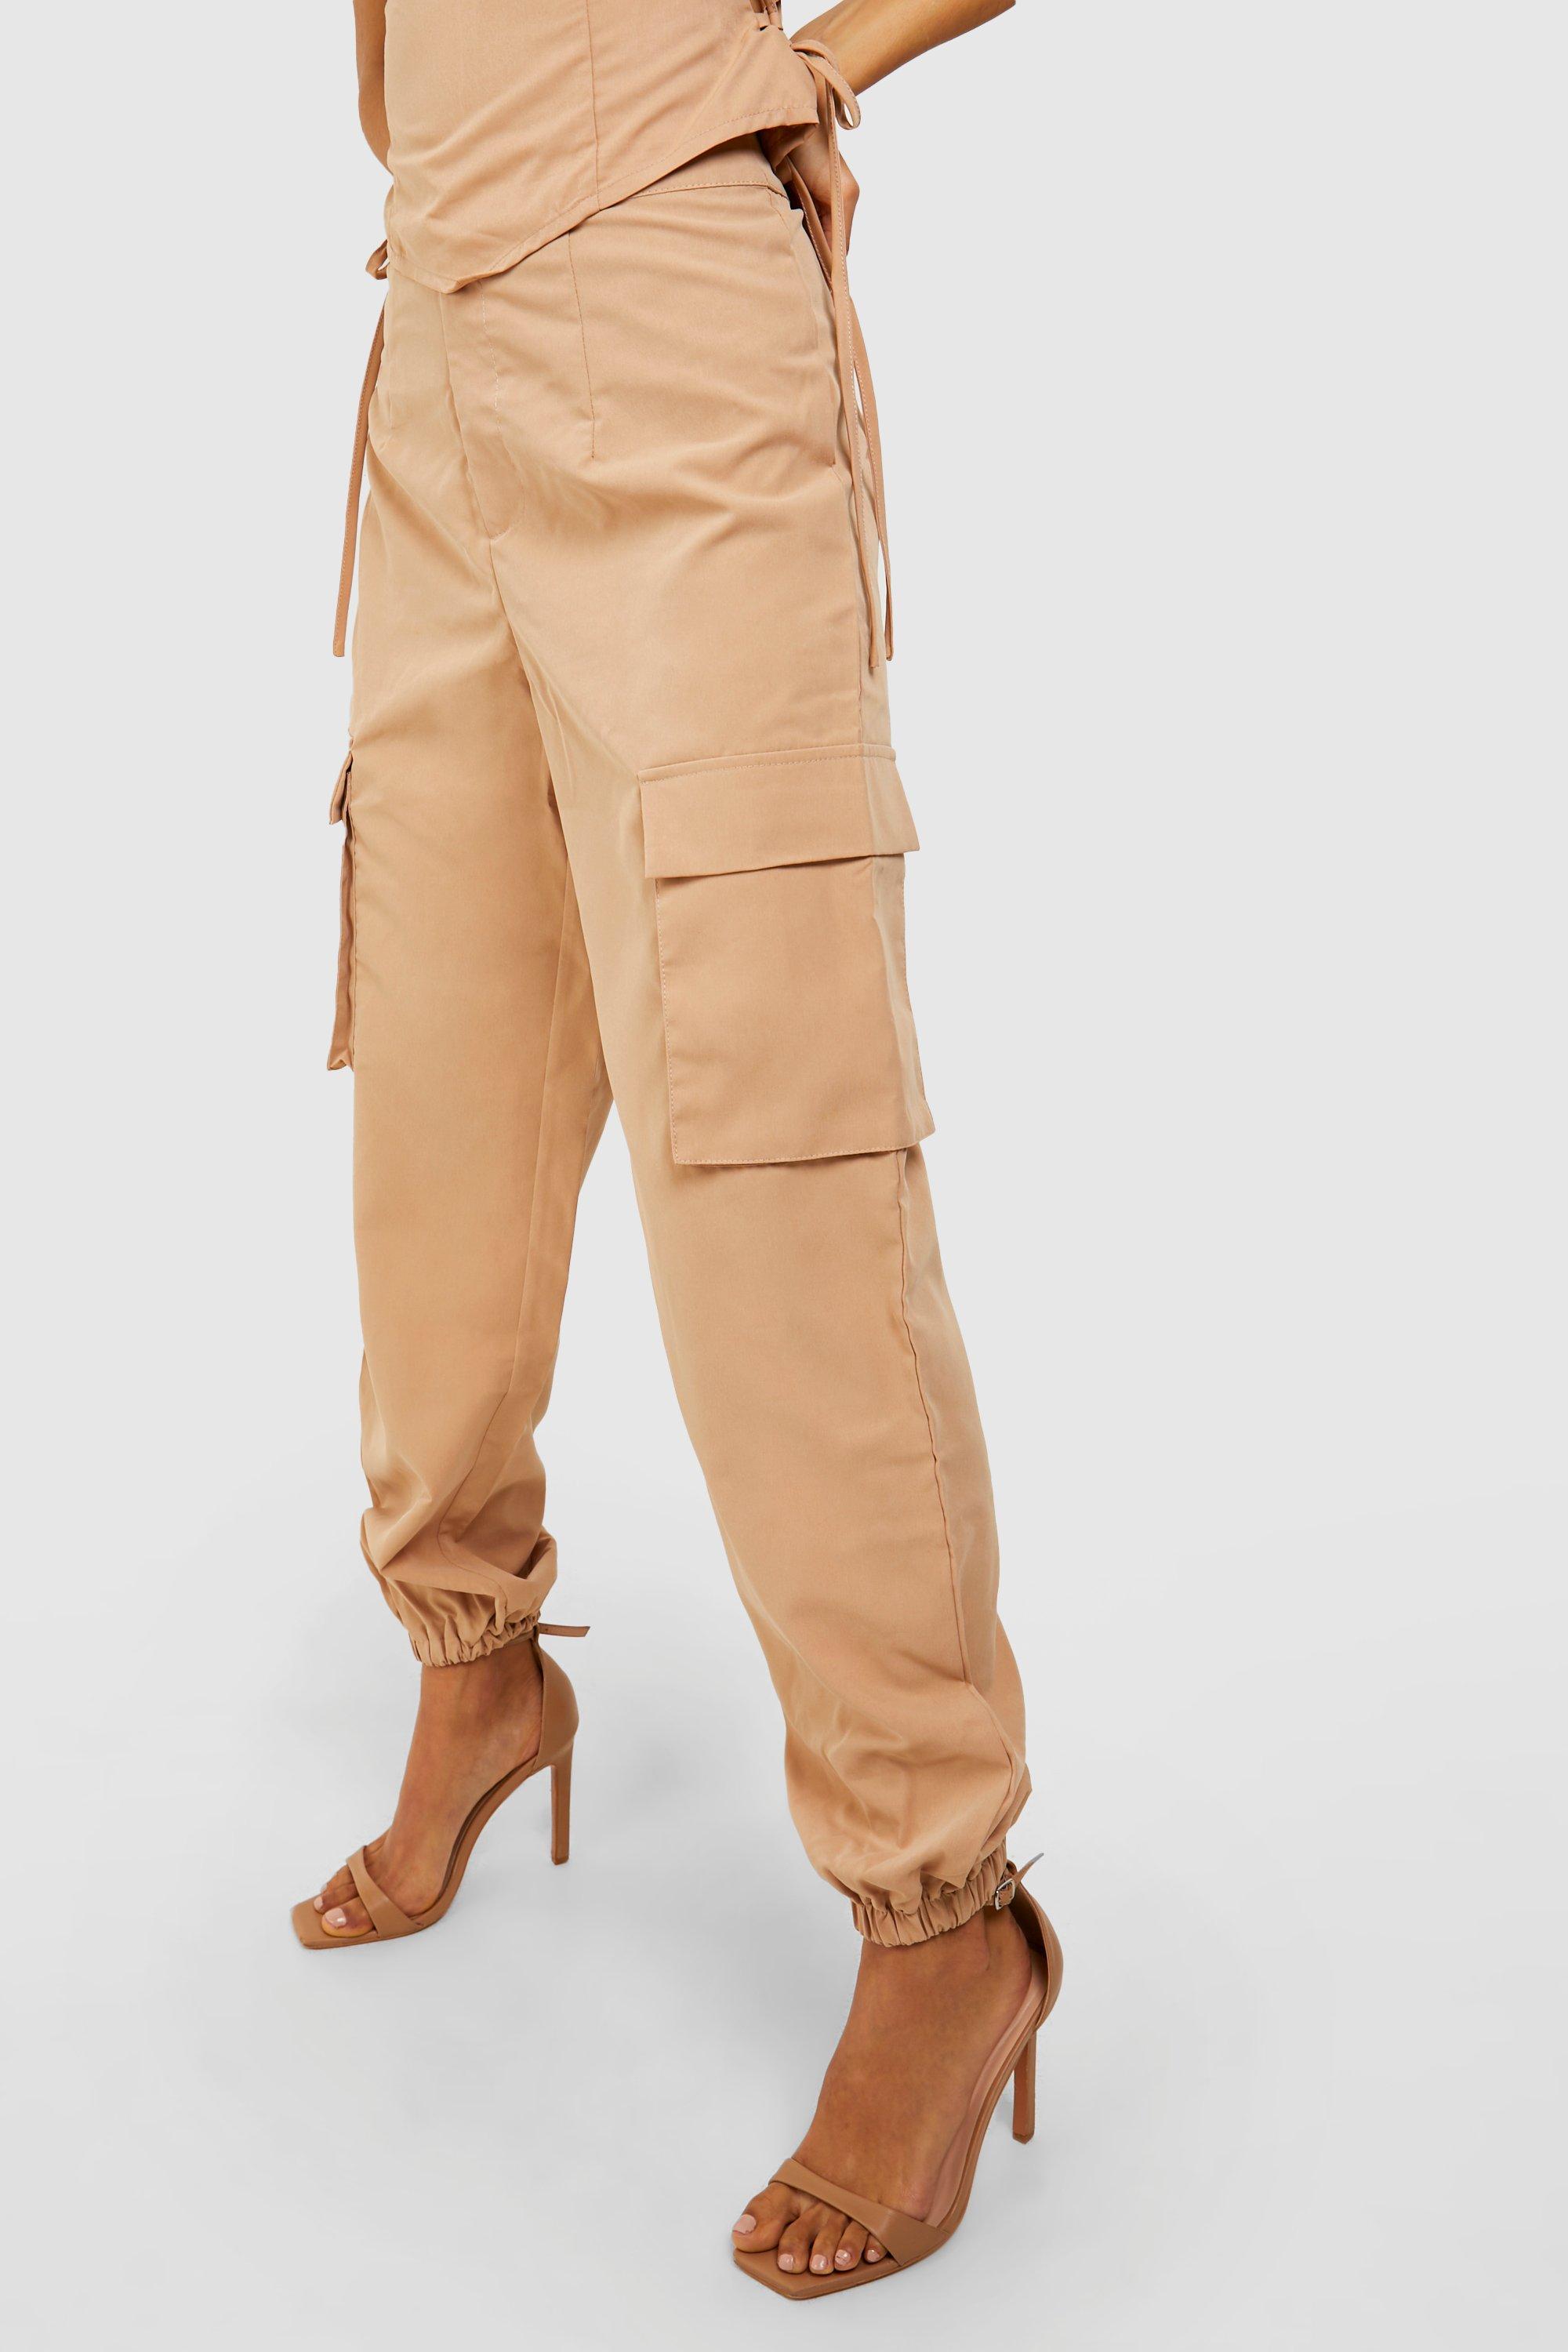 Women's Relaxed Fit Cargo Pants